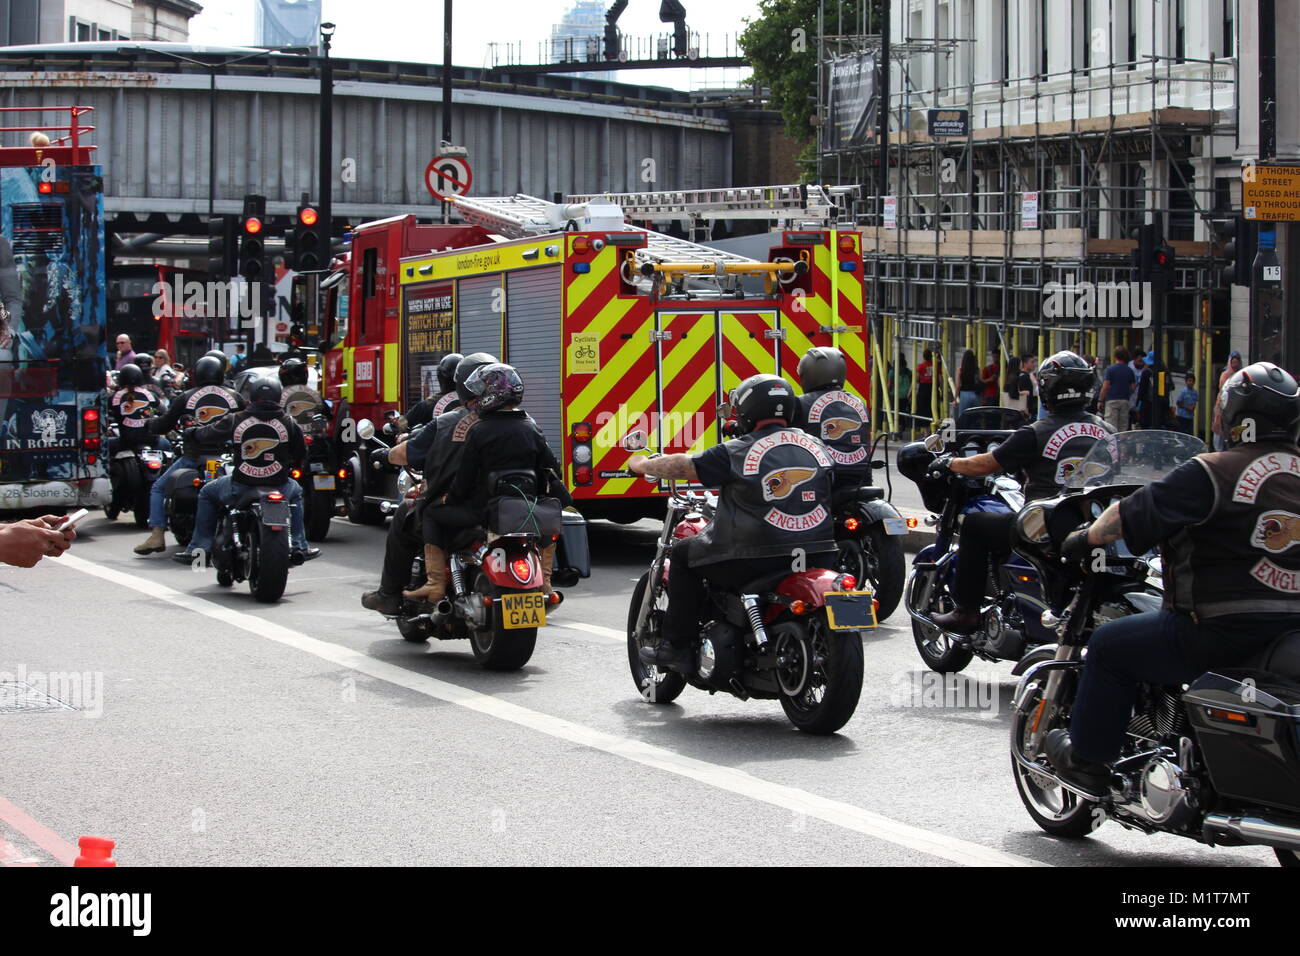 London, United Kingdom - August 26 2017: A group of Hell's Angels motor bikers in London queue at traffic lights behind a fire engine. Stock Photo